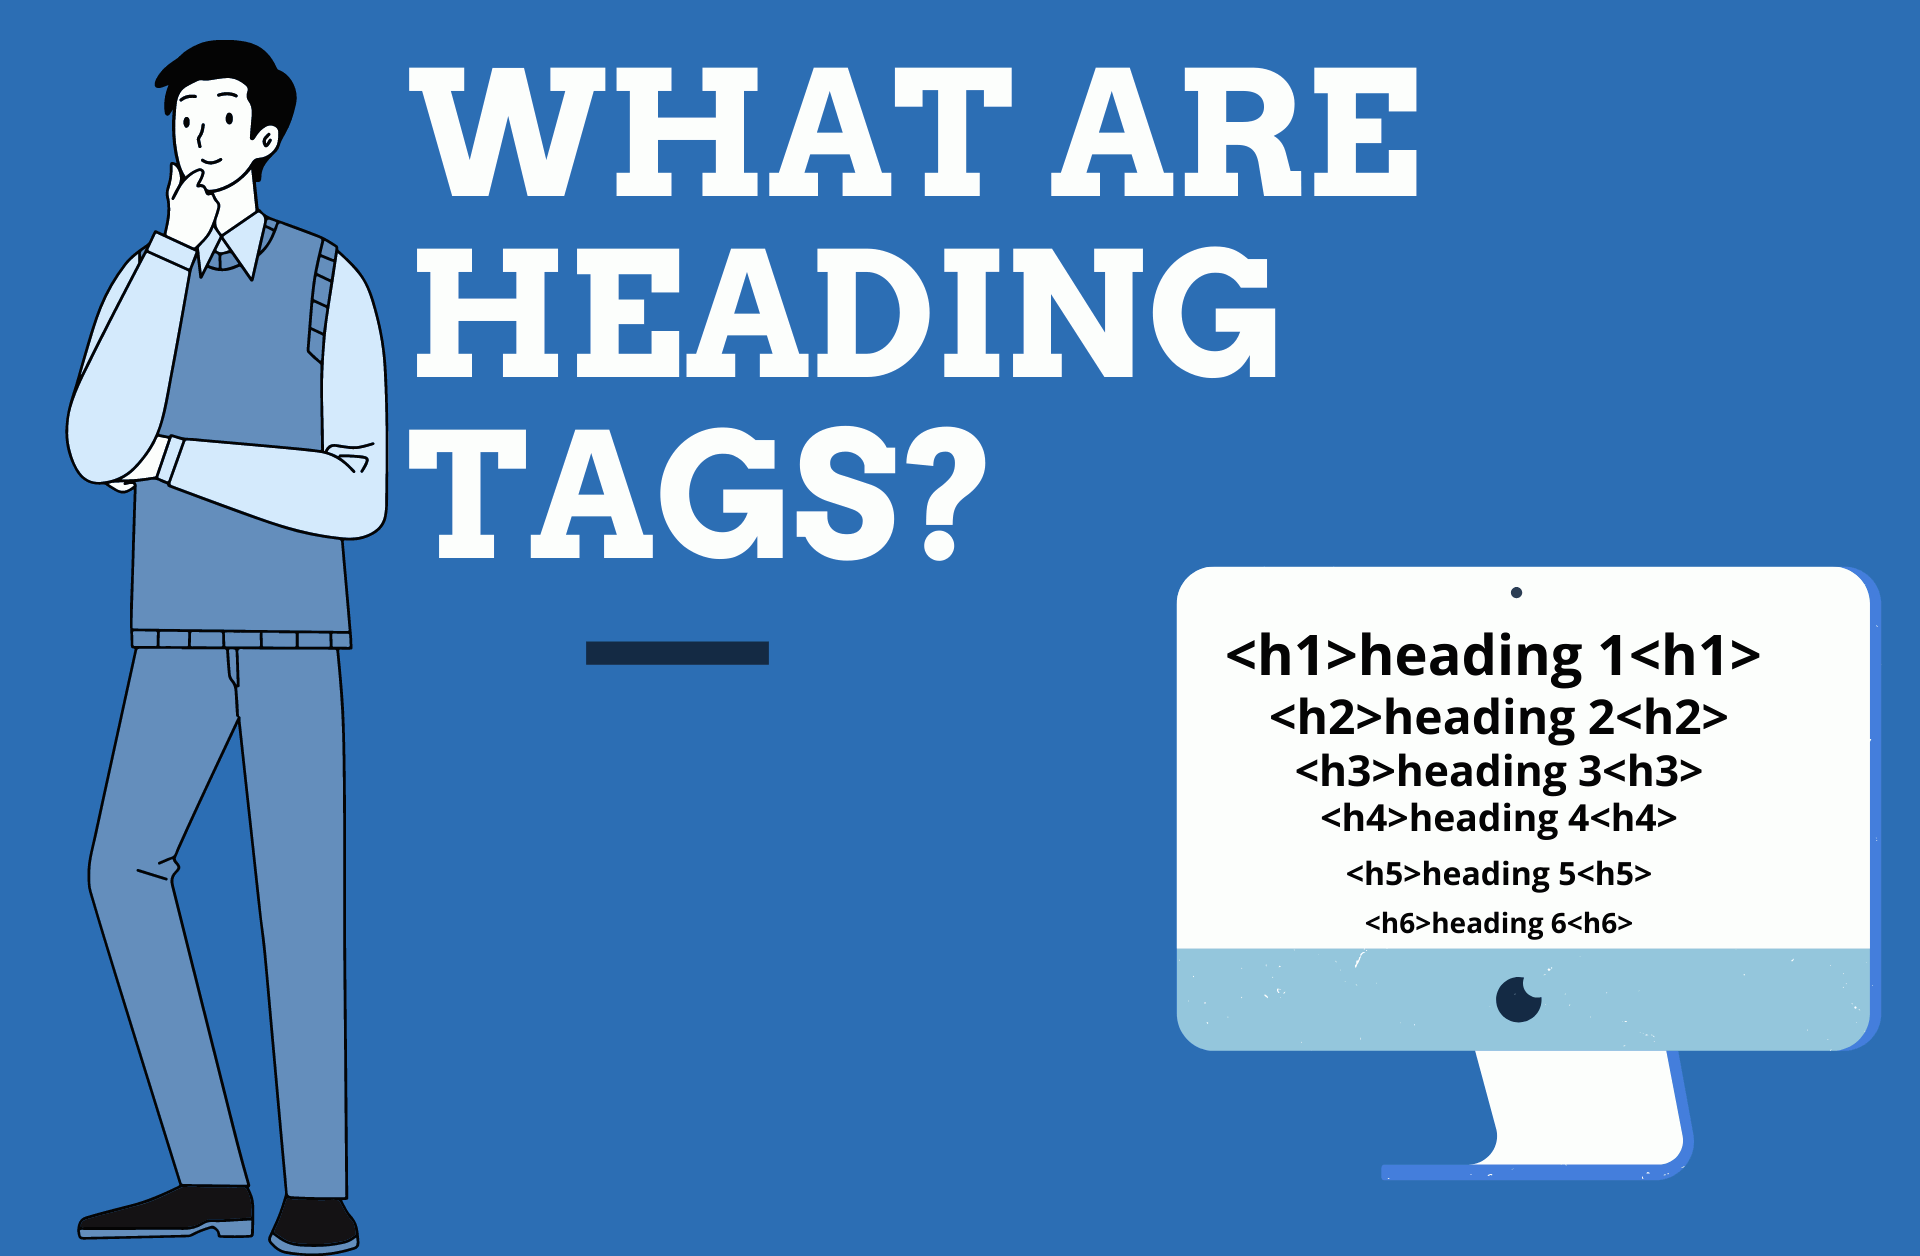 You are currently viewing What are Heading Tags? How To Make Your Tags Matter the Most in SEO: The Ultimate Guide